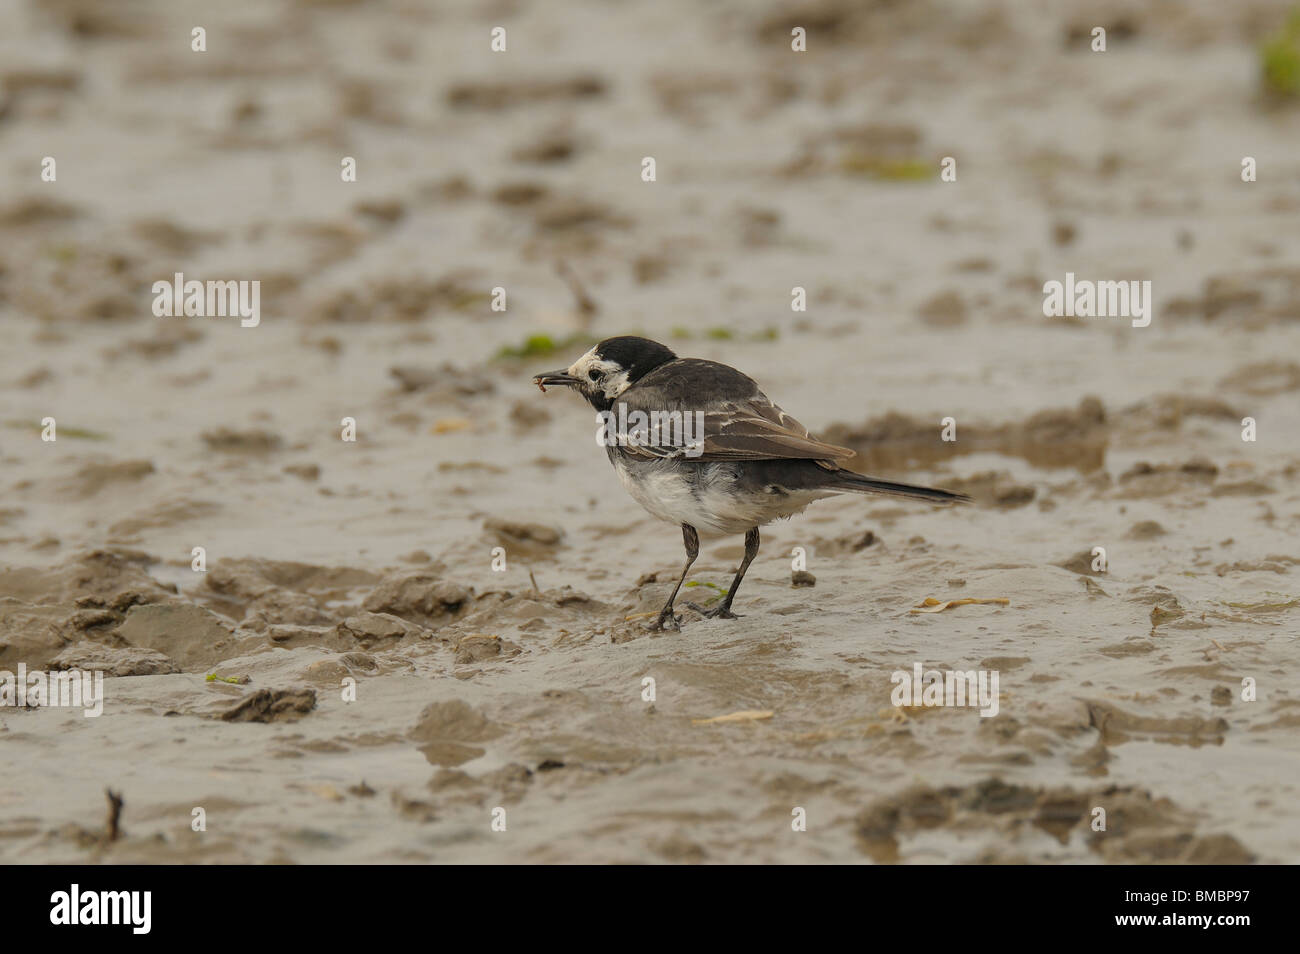 Adult pied wagtail feeding in mud Stock Photo